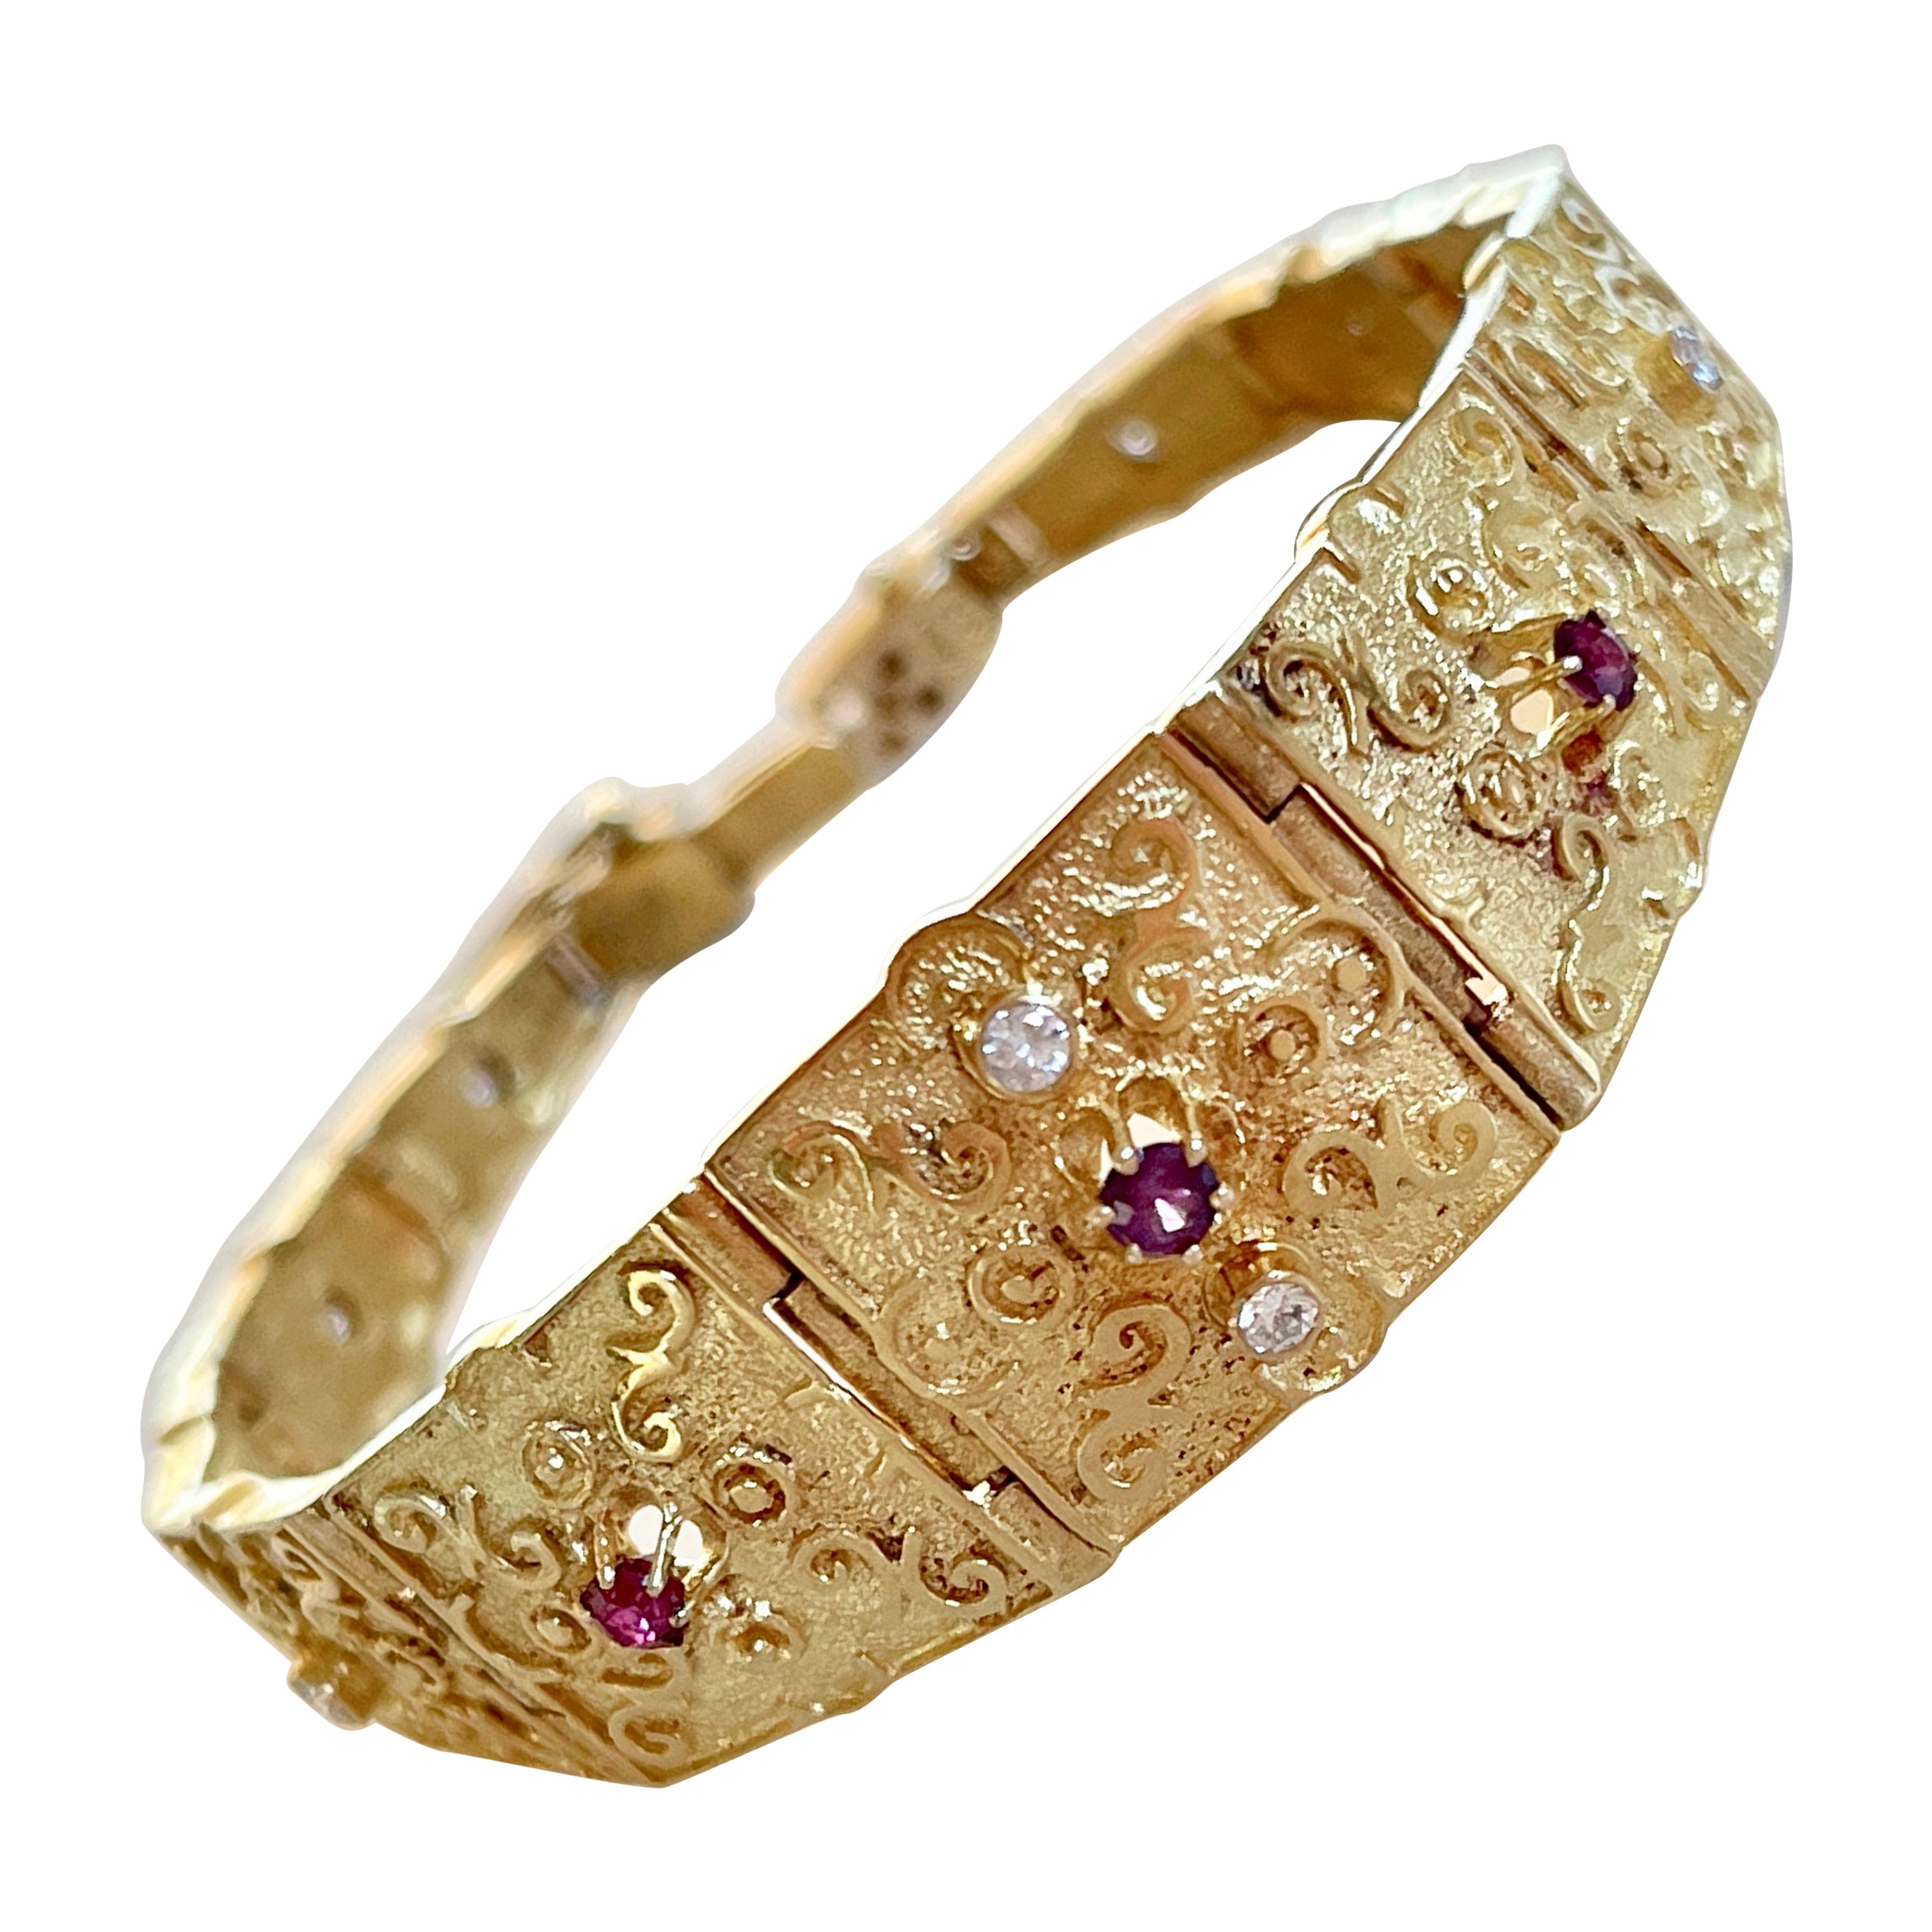 Unique 18ct Solid Gold Panel Bracelet Natural Rubies Diamonds with Valuation For Sale